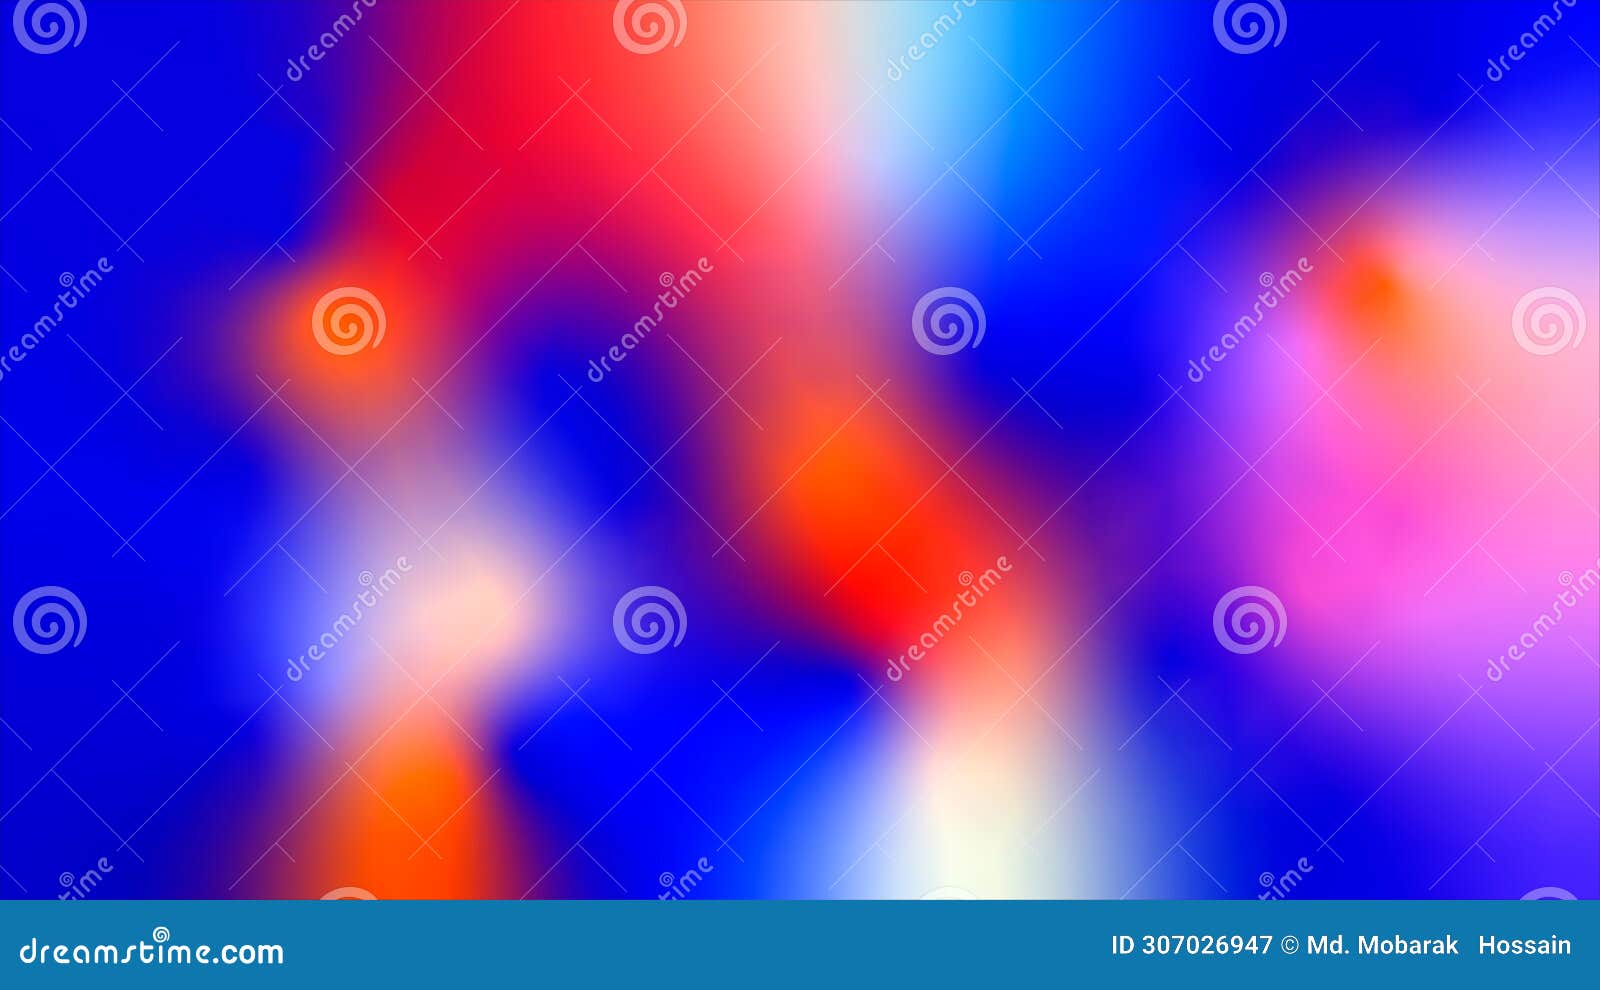 red, blue, purple and white color gradient background, abstract background. gradient blurred colorful background